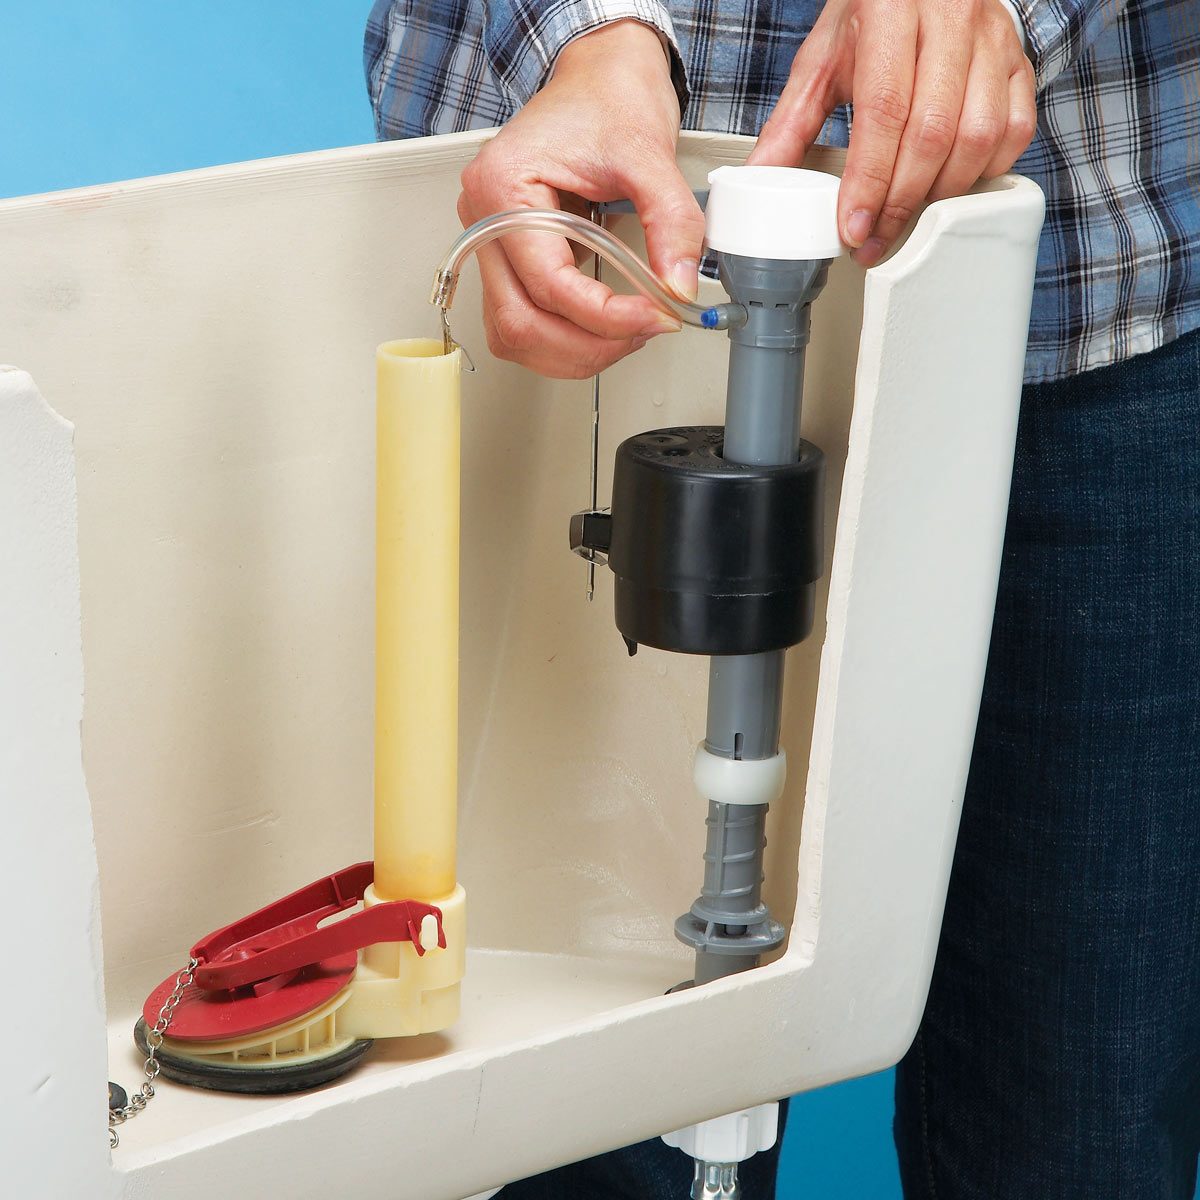 How to Stop a Running Toilet (DIY) | Family Handyman